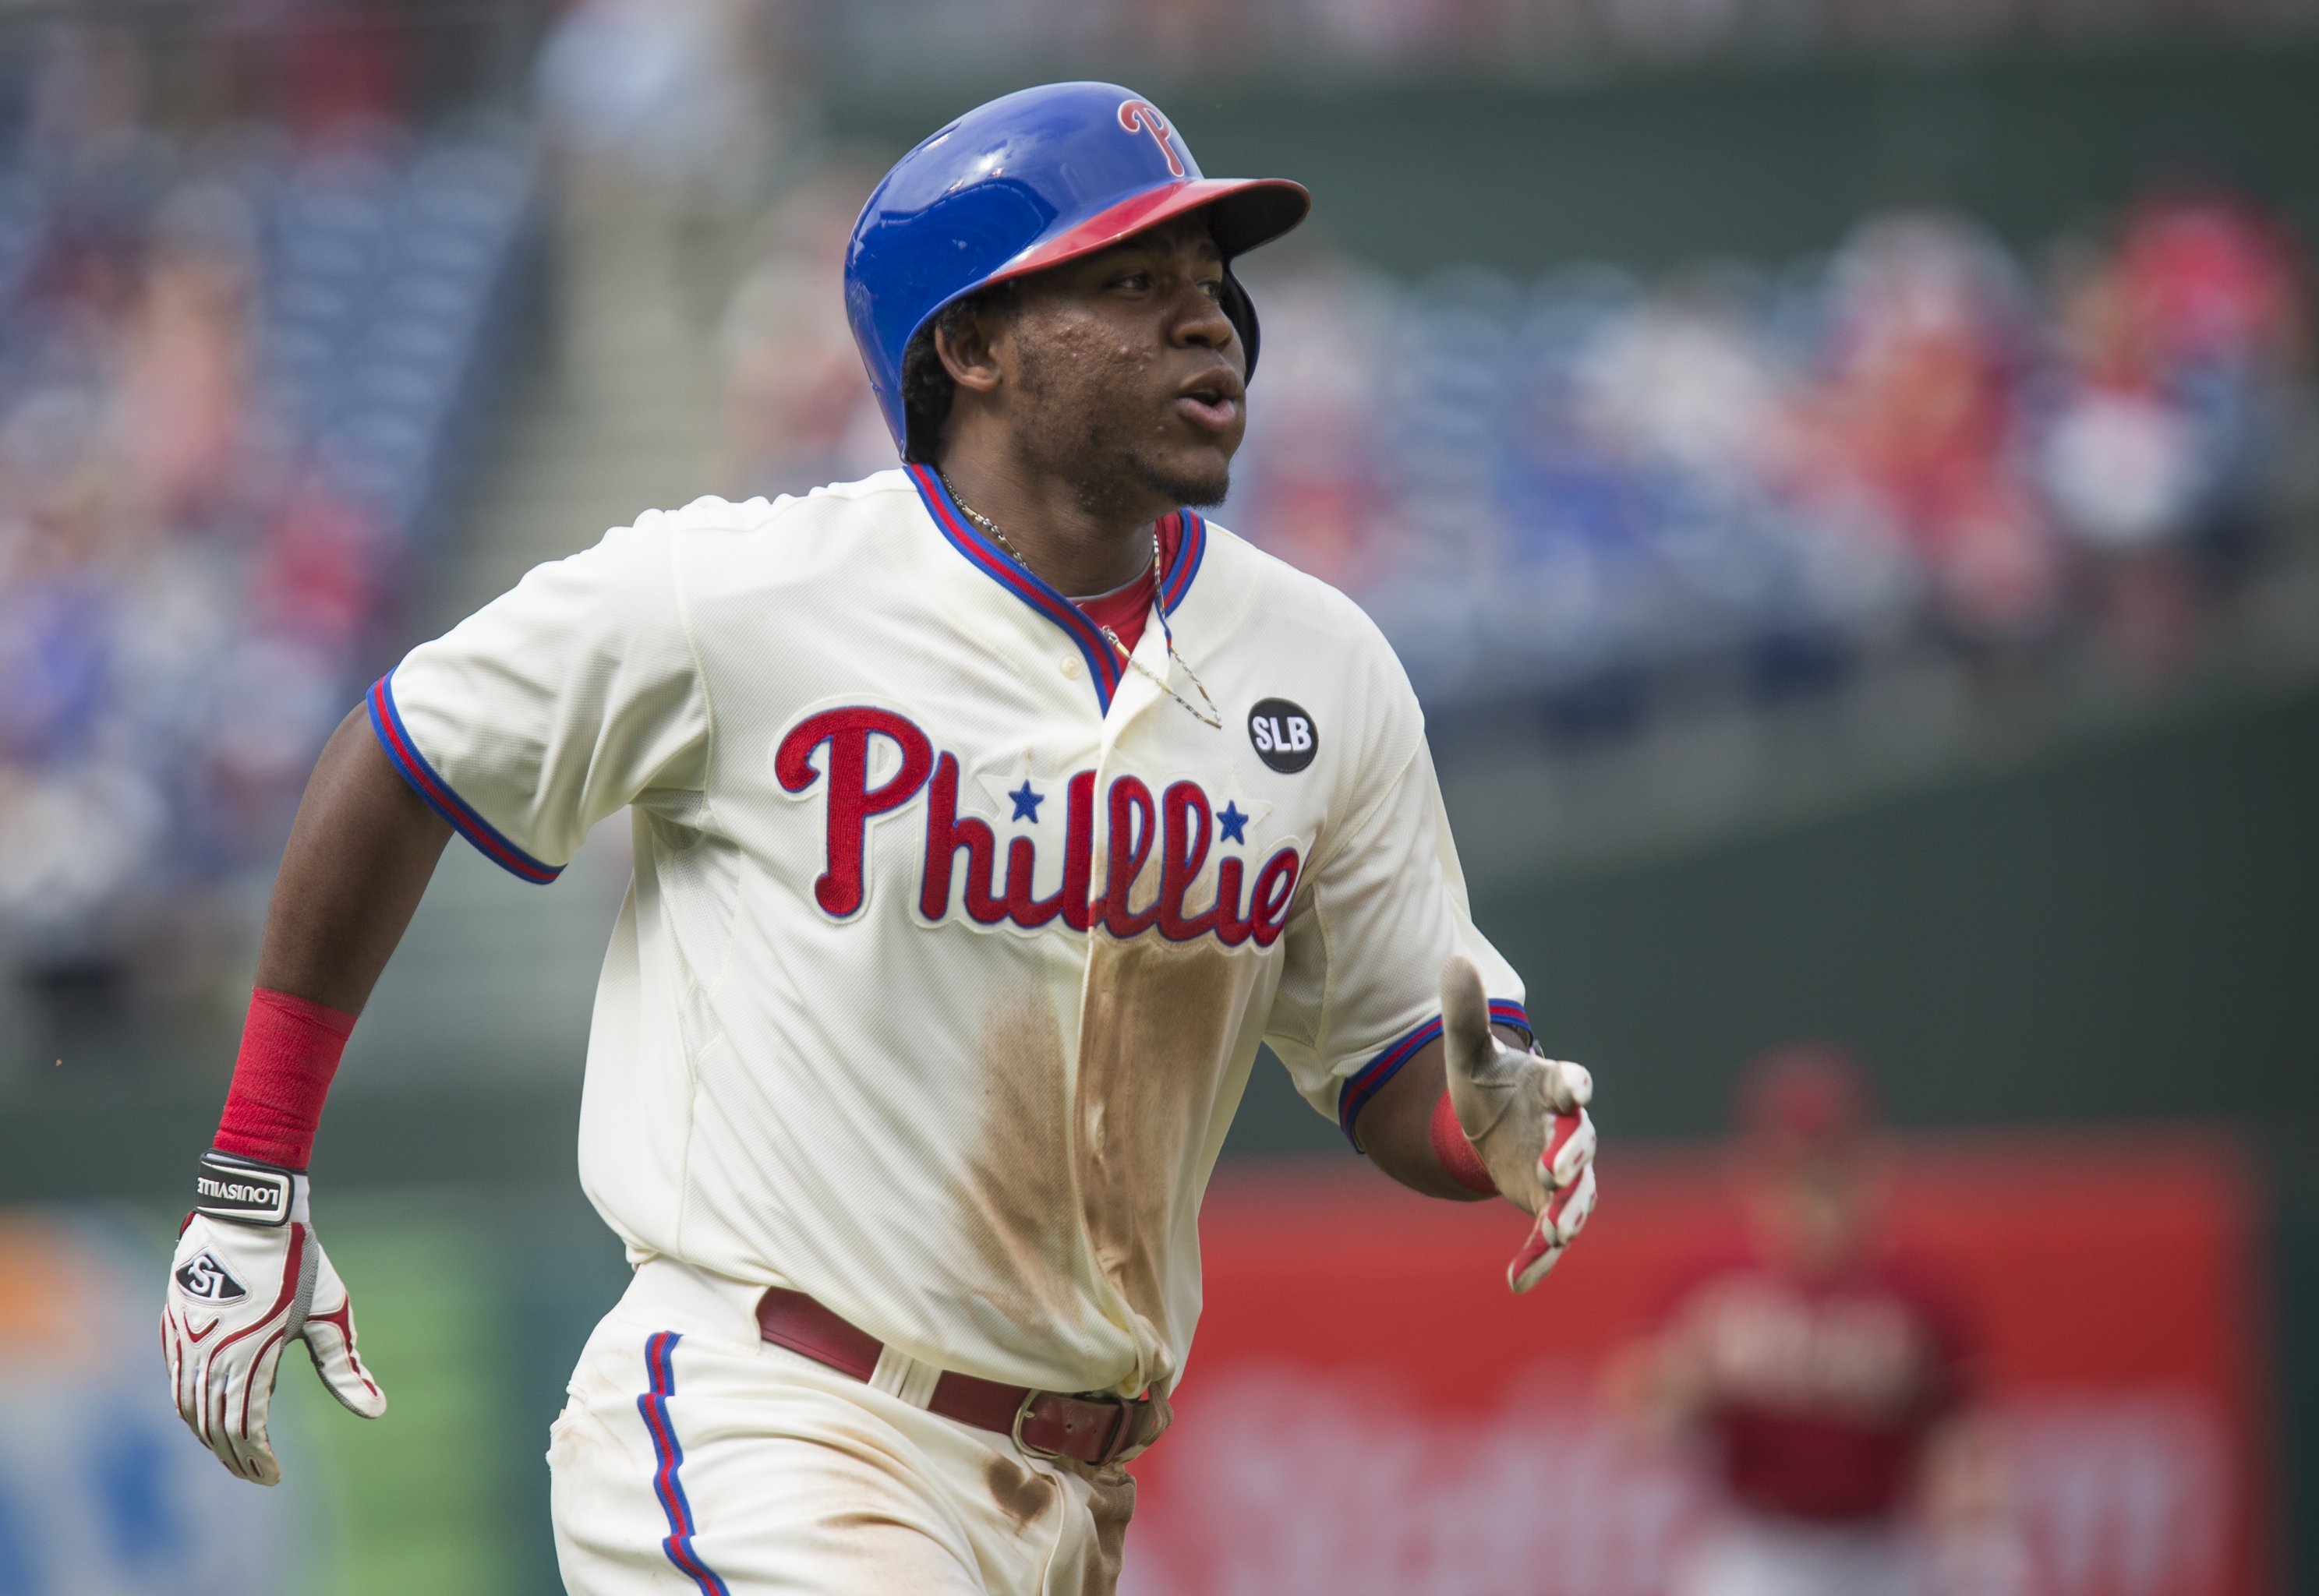 Fantasy baseball waiver wire: Top corner infield pickups, adds for